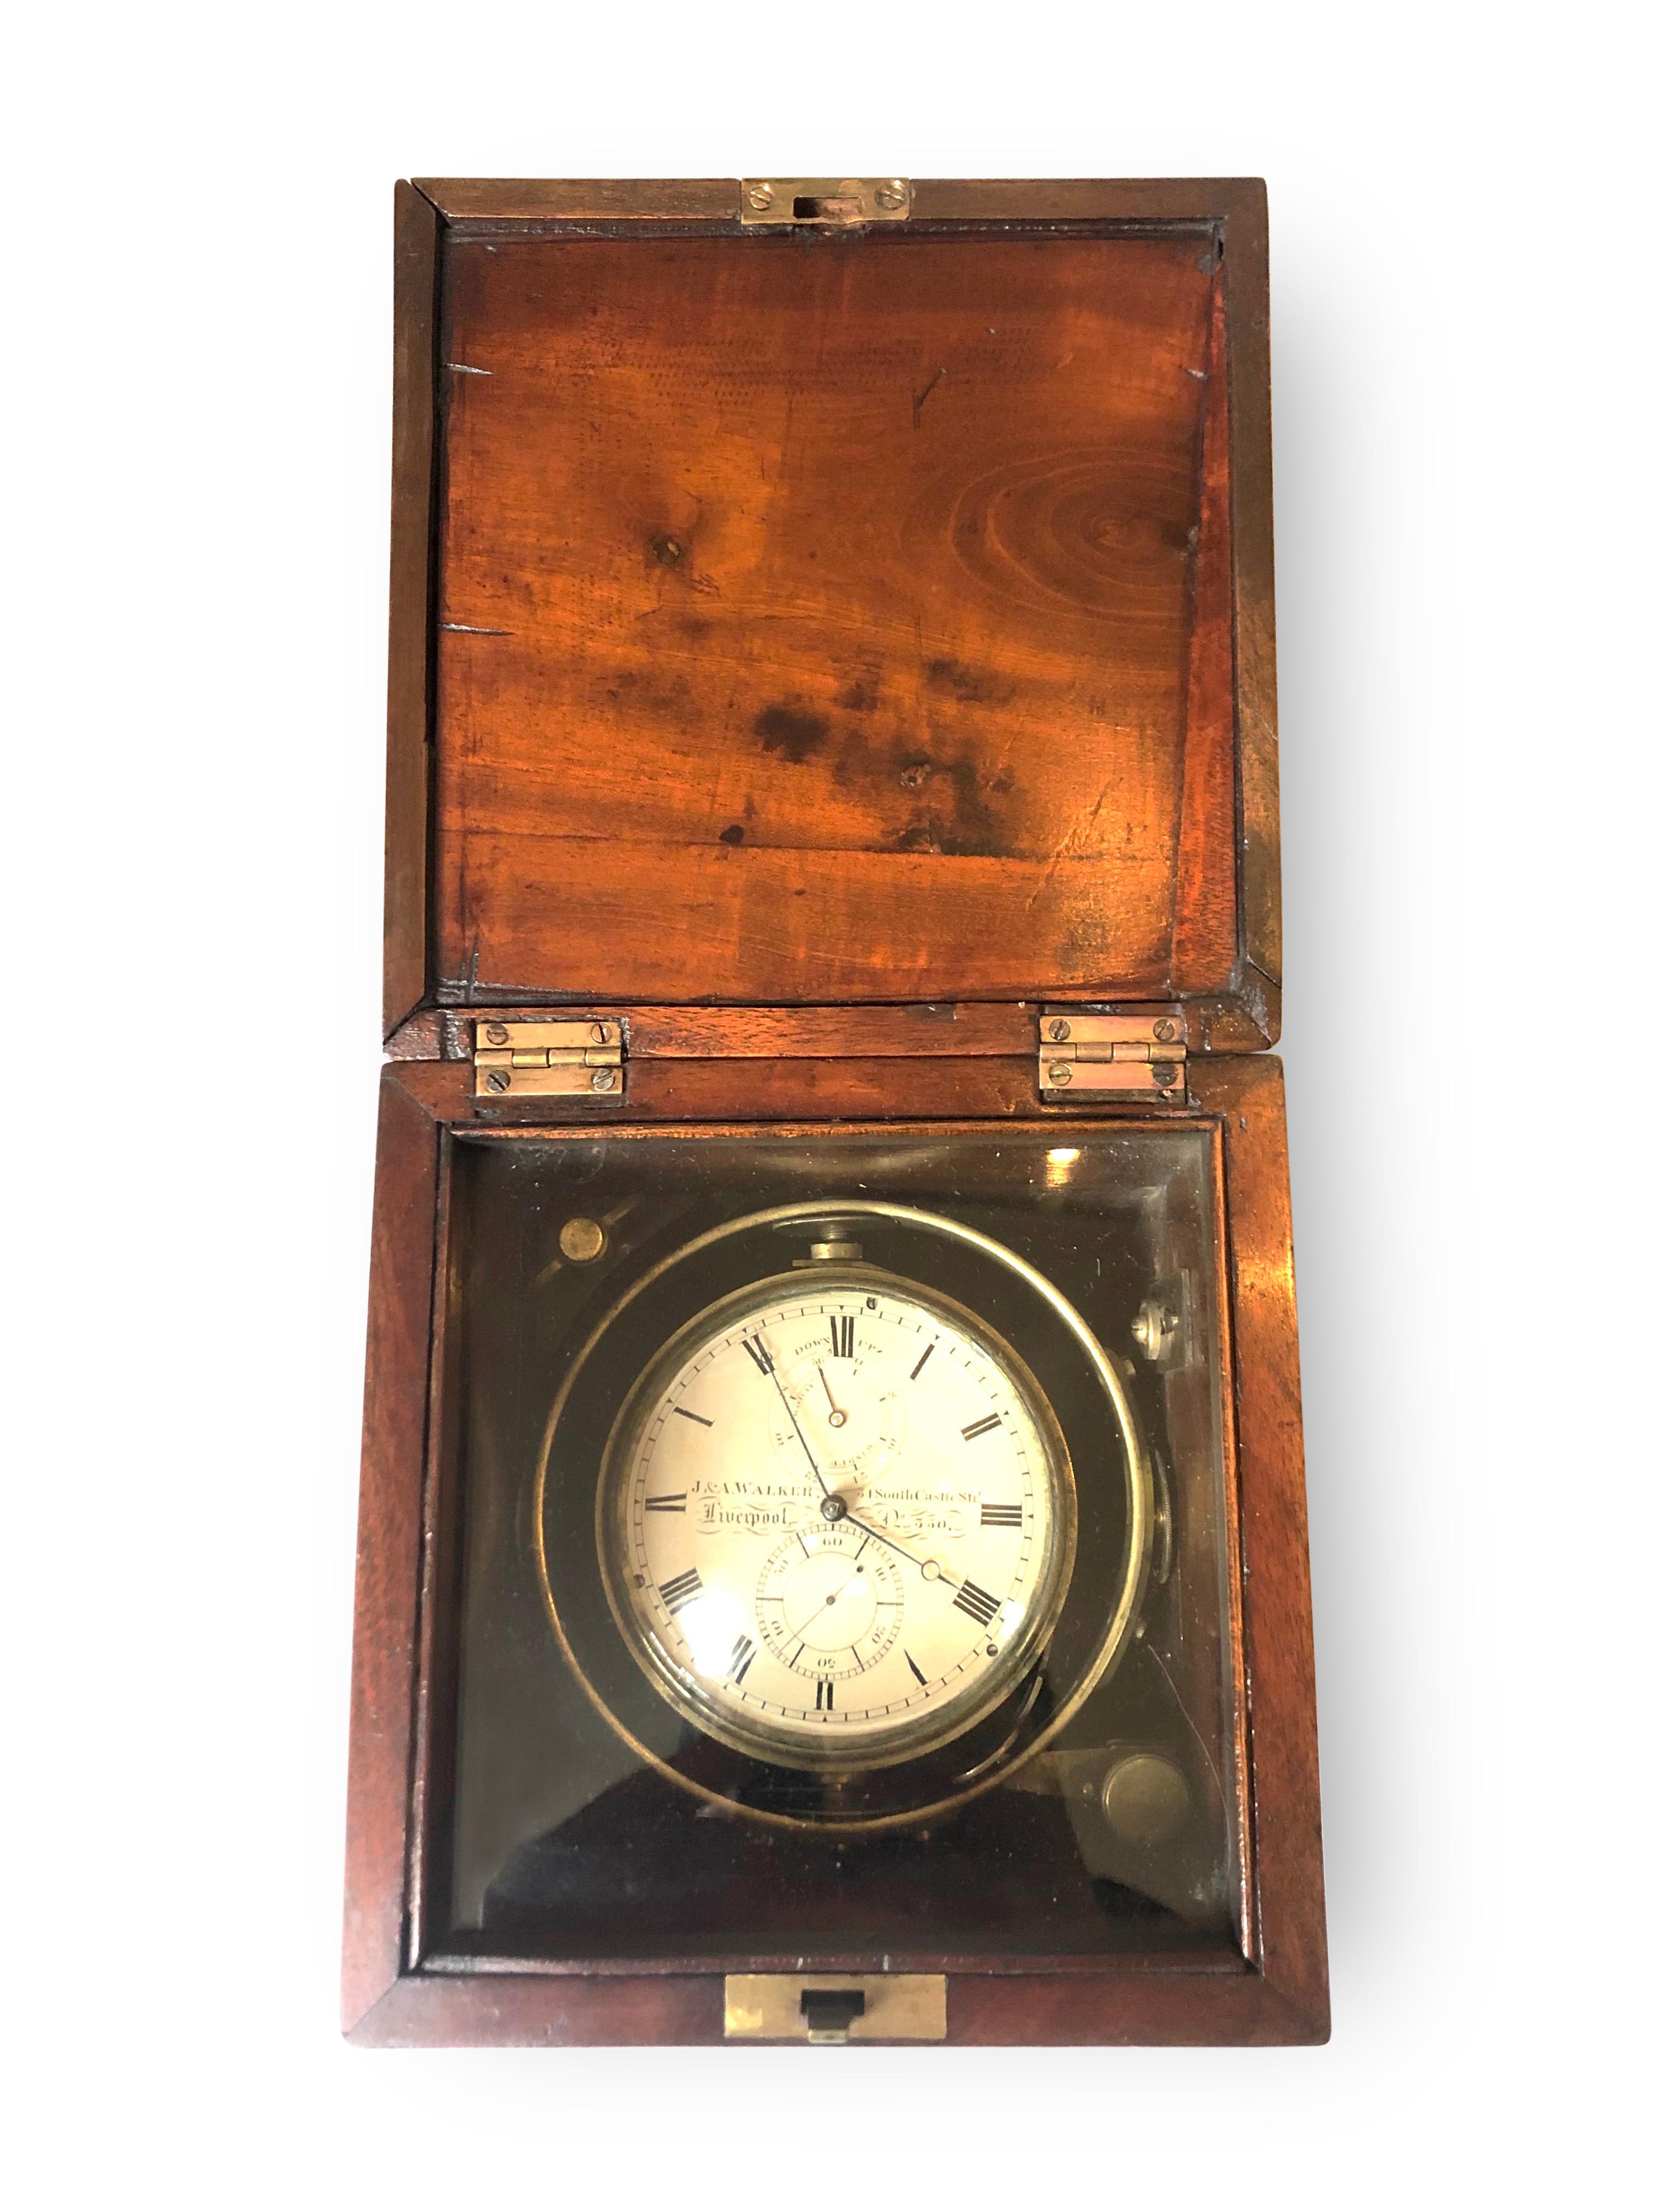 Marine chronometer
J & A. Walker South Castle Street Liverpool 19th century mahogany Marine Chronometer two stage case with Bone plaques, viewing glass and flush fitting side handles. Enclosing a brass gimble mounted movement with signed and